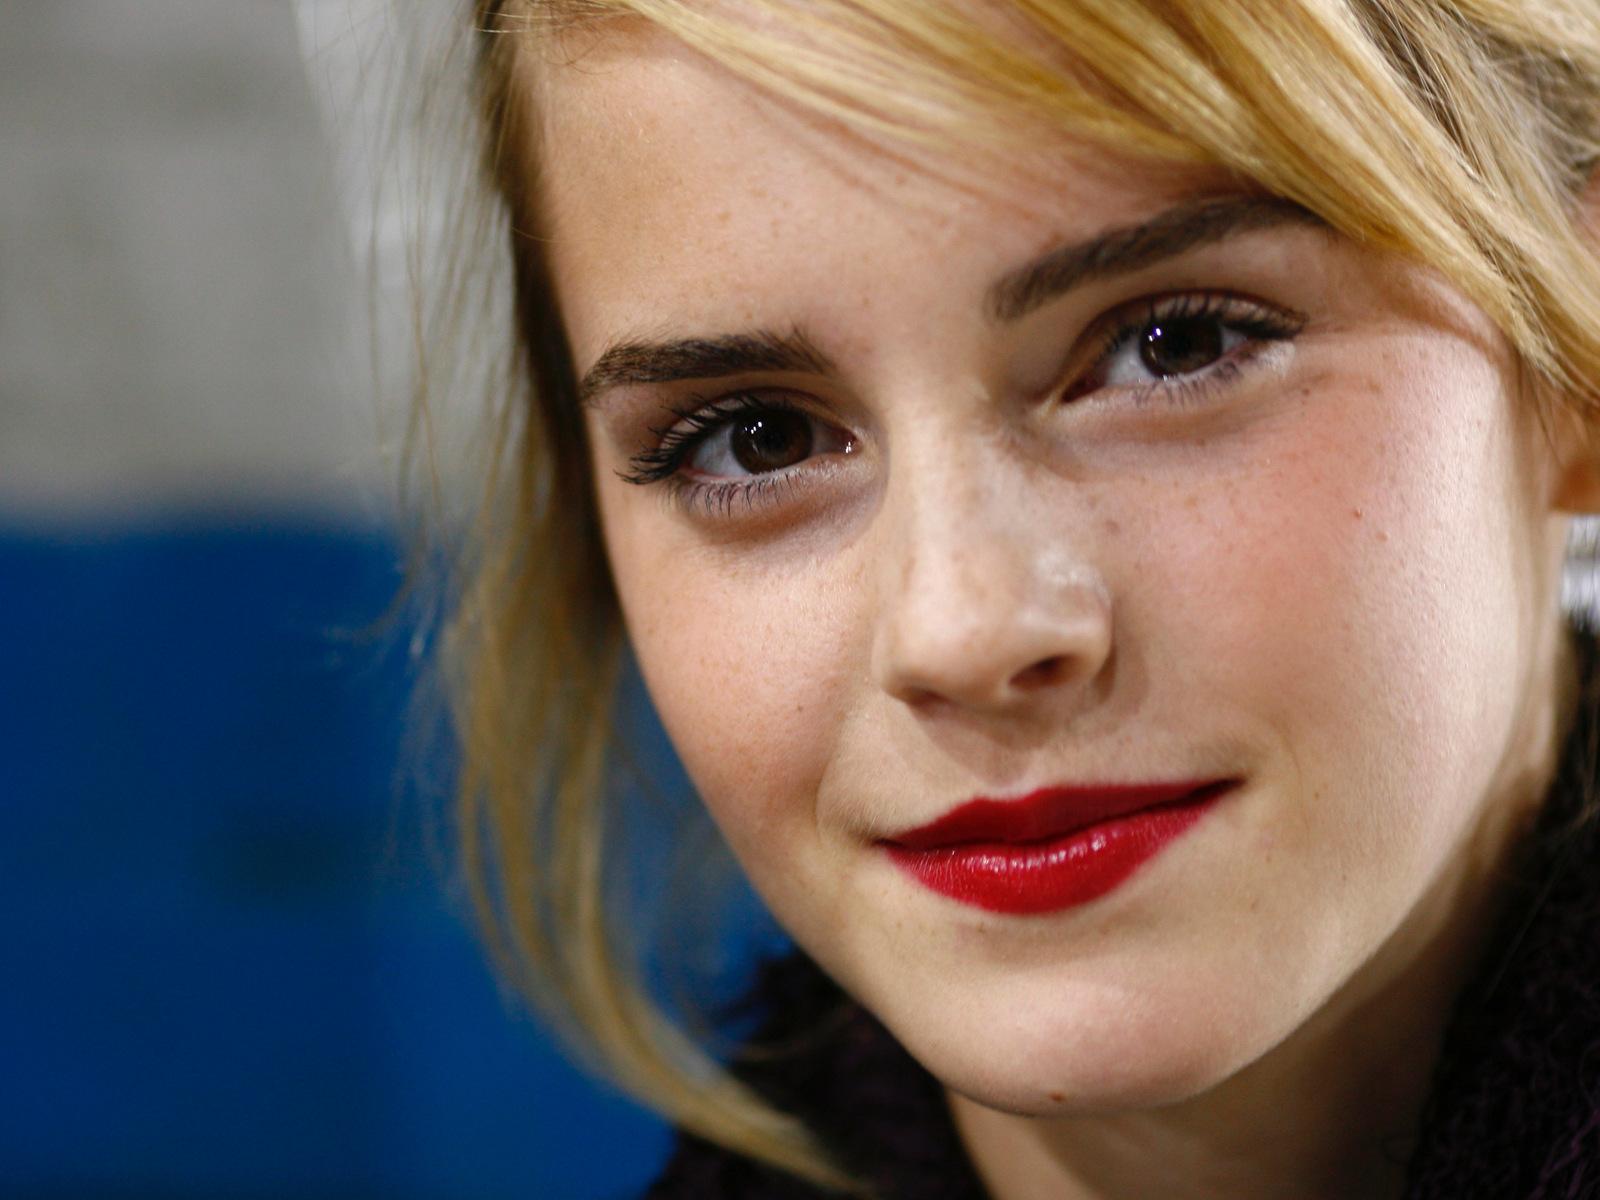 Emma Watson Red Lipstick Face Close Up Image Gallery and HD Wallpaper